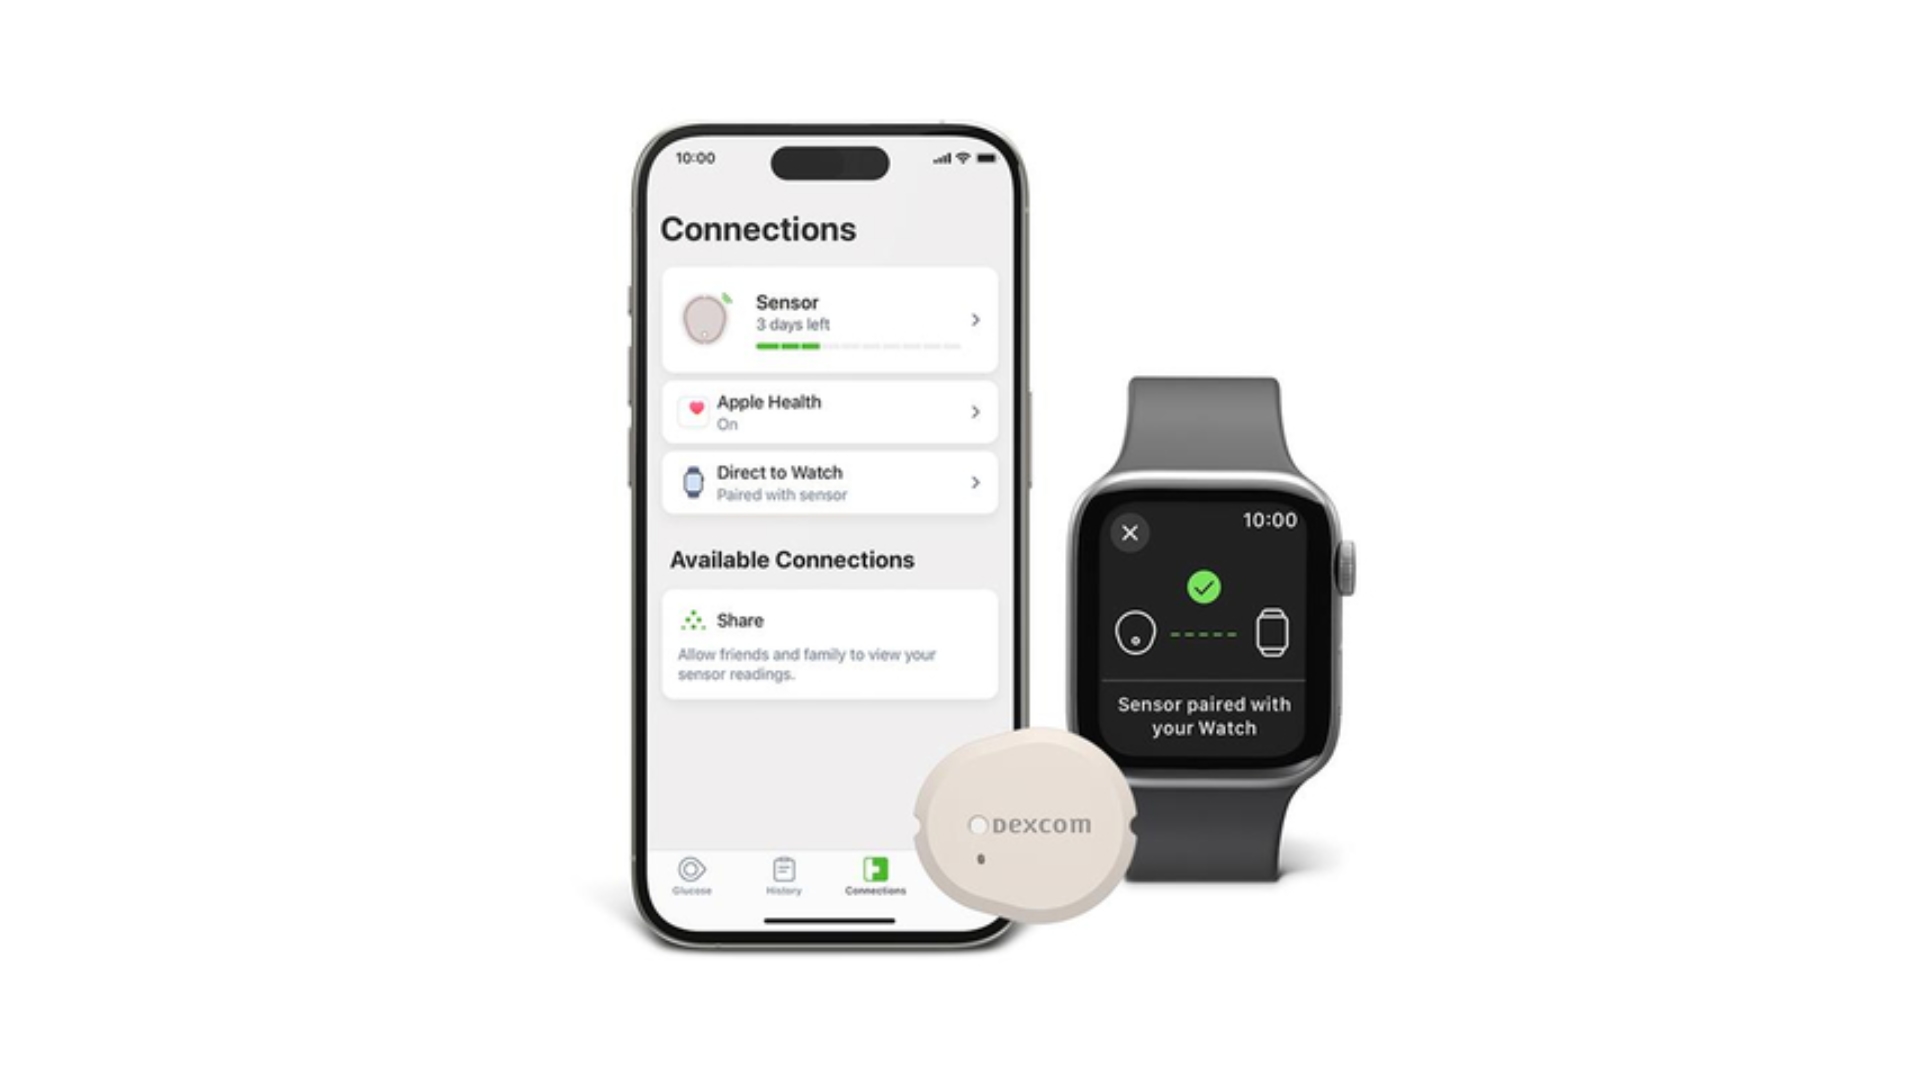 Dexcom Glucose Monitor Now Sends Real-Time Blood Sugar Data to Apple Watch